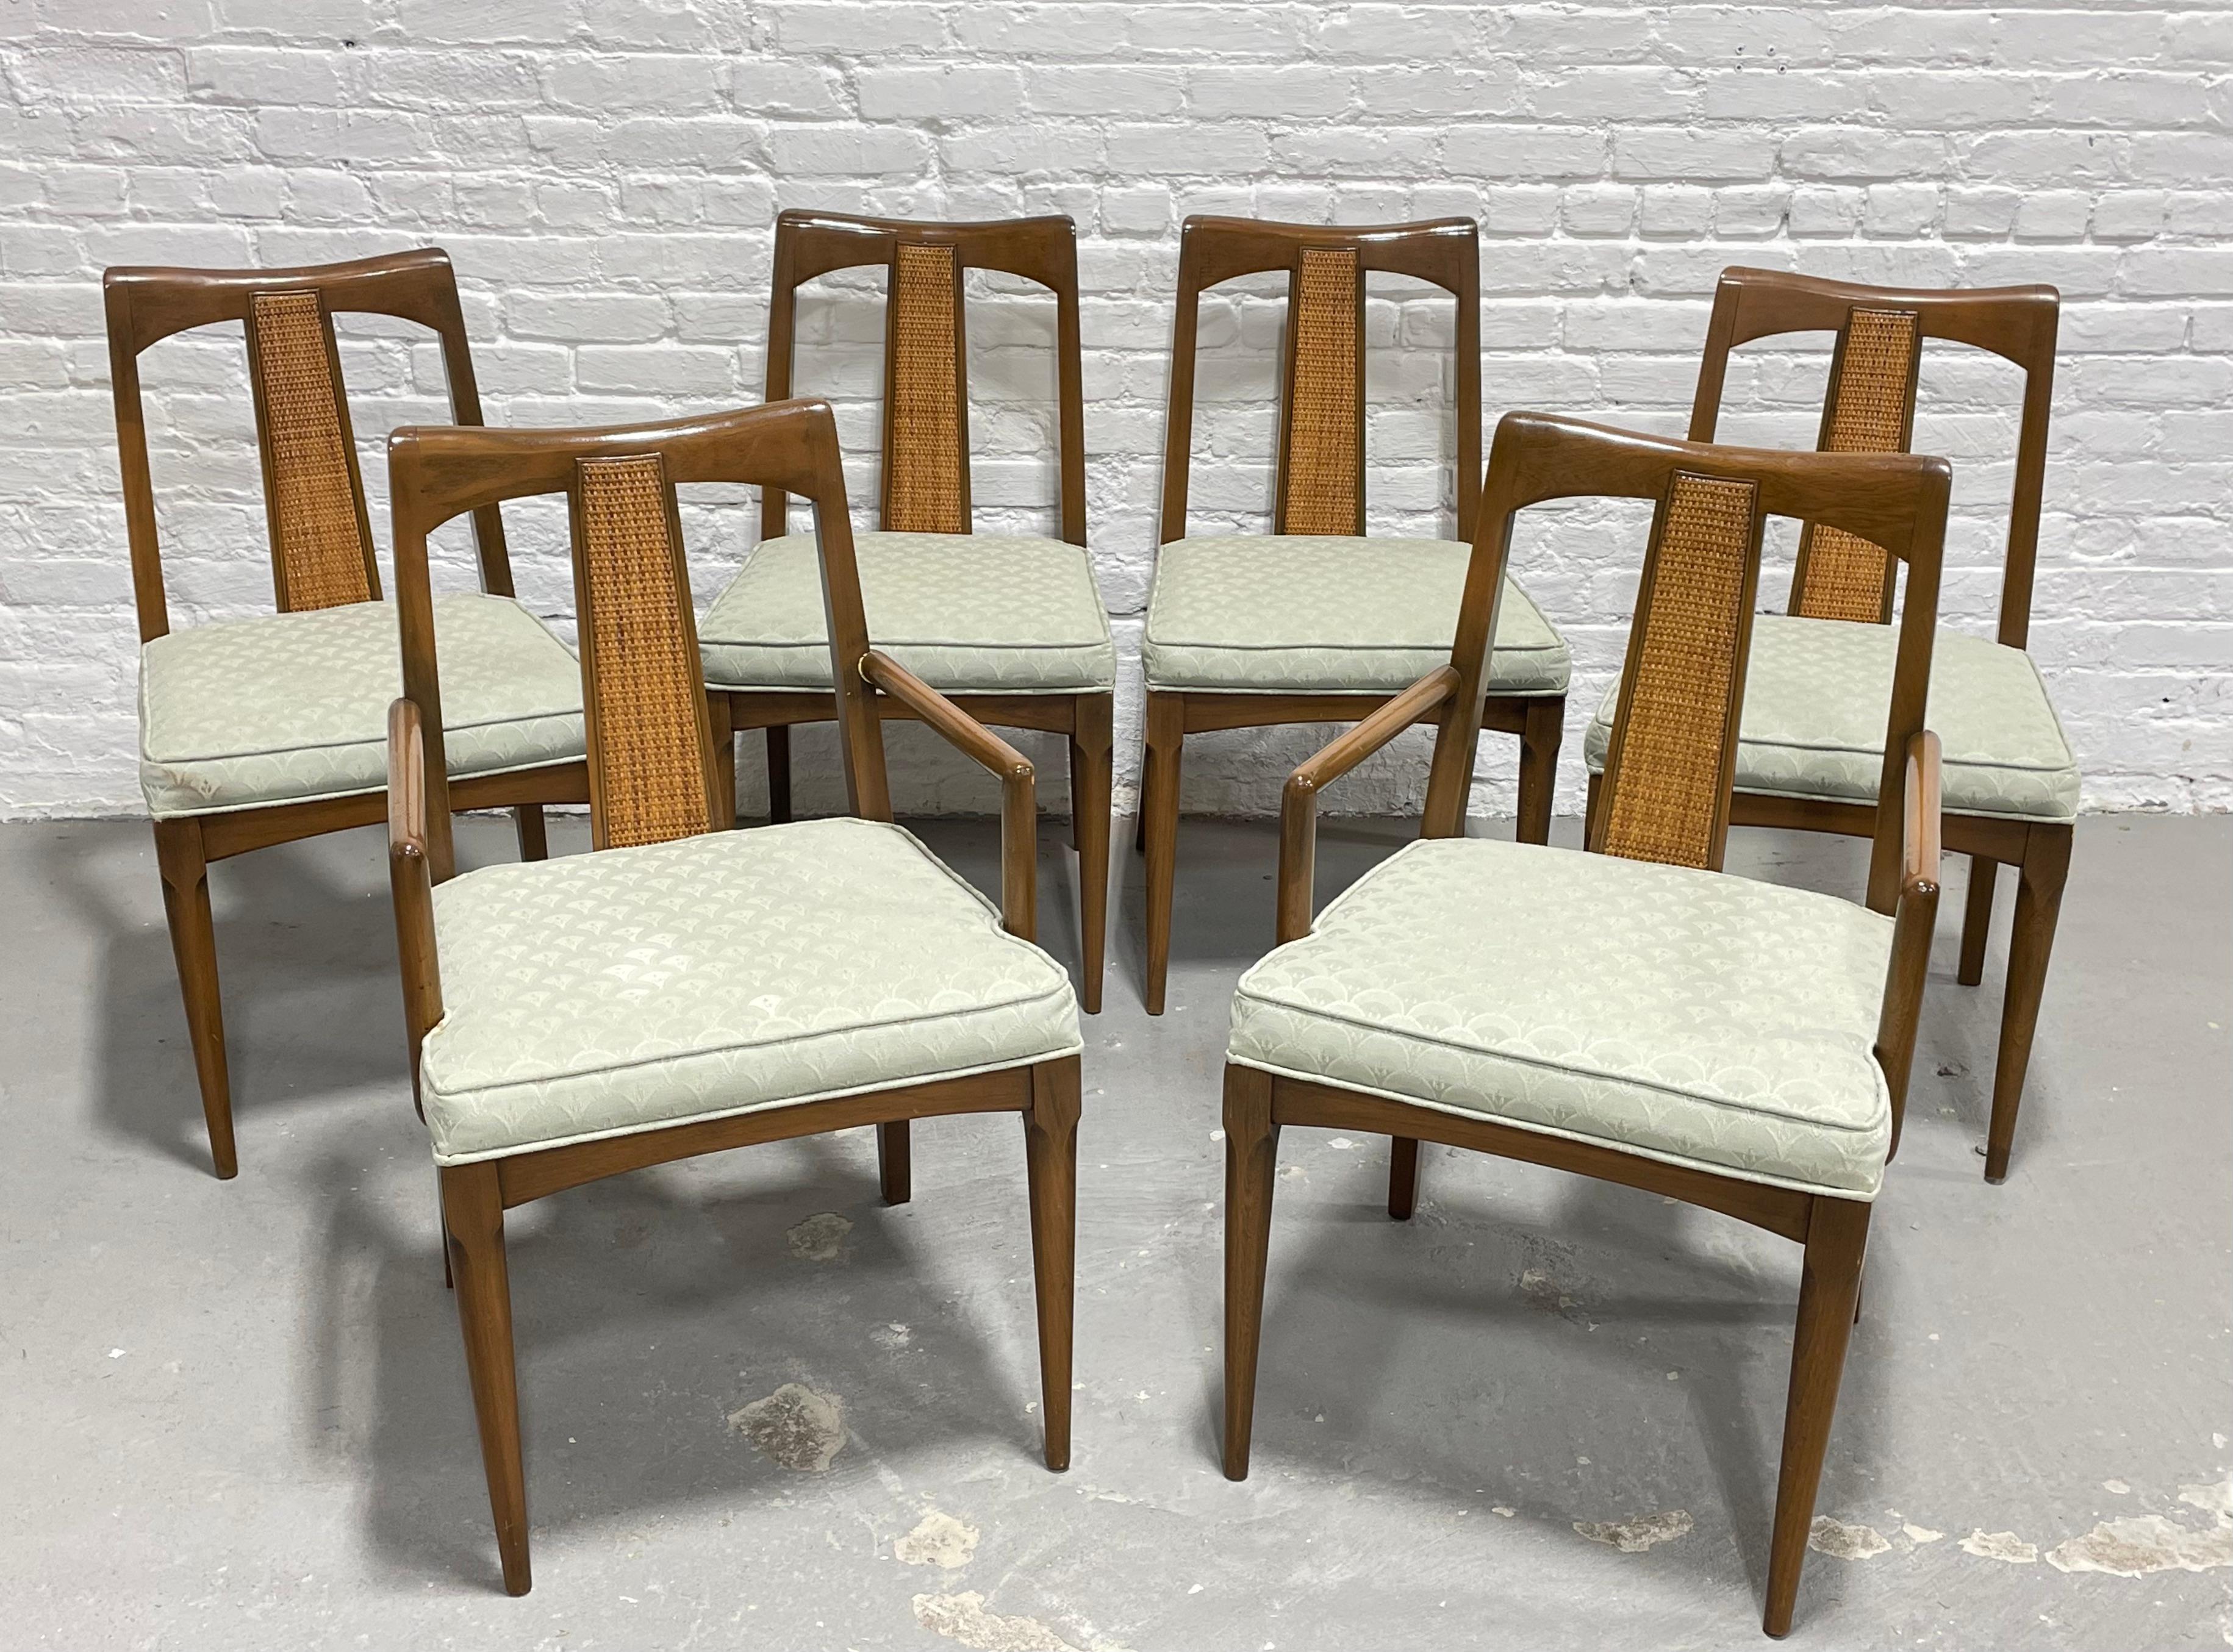 Mid-Century Modern Walnut caned back dining chairs, set of 6. These solid walnut dining chairs have gorgeous caned back supports and neutral patterned light pistachio upholstered seats. The caned backs are unbroken and lovely. Simply stunning set